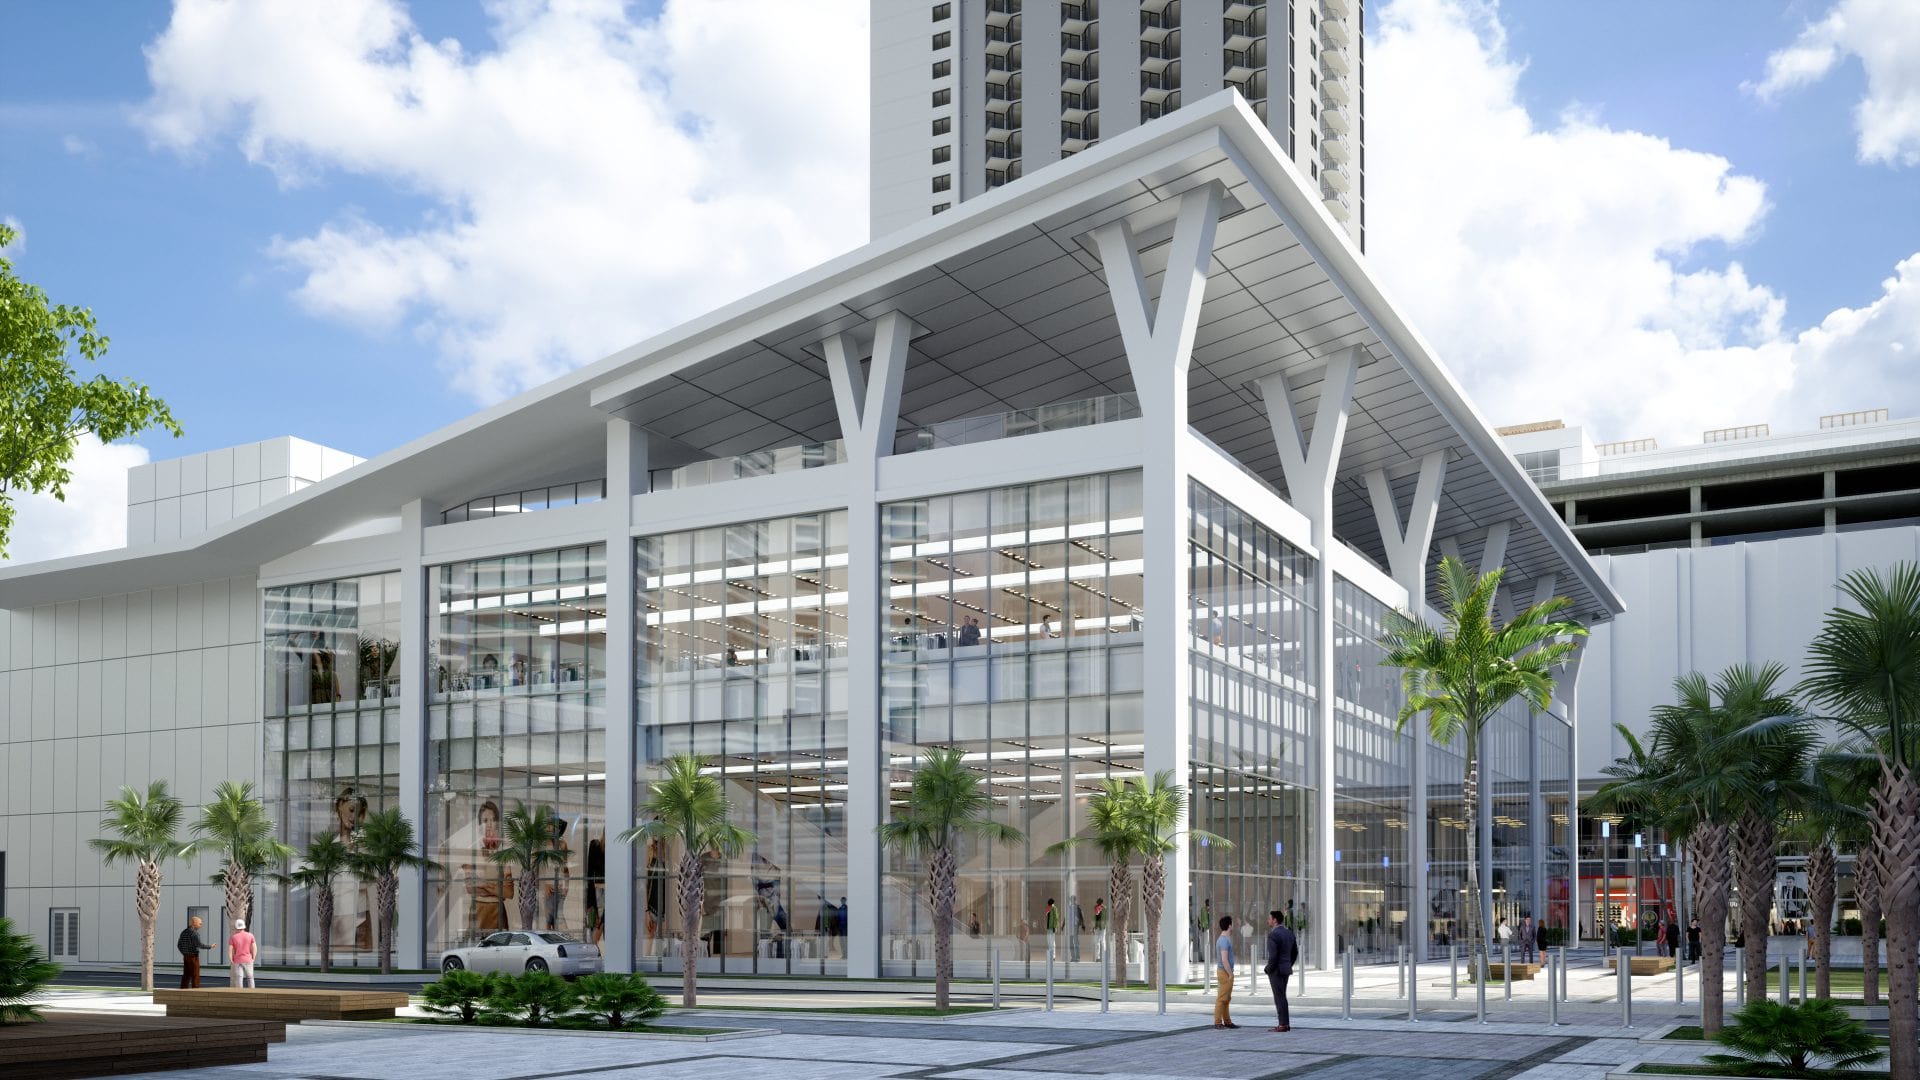 Miami Worldcenter Block-F. Designed by NBWW Architects.